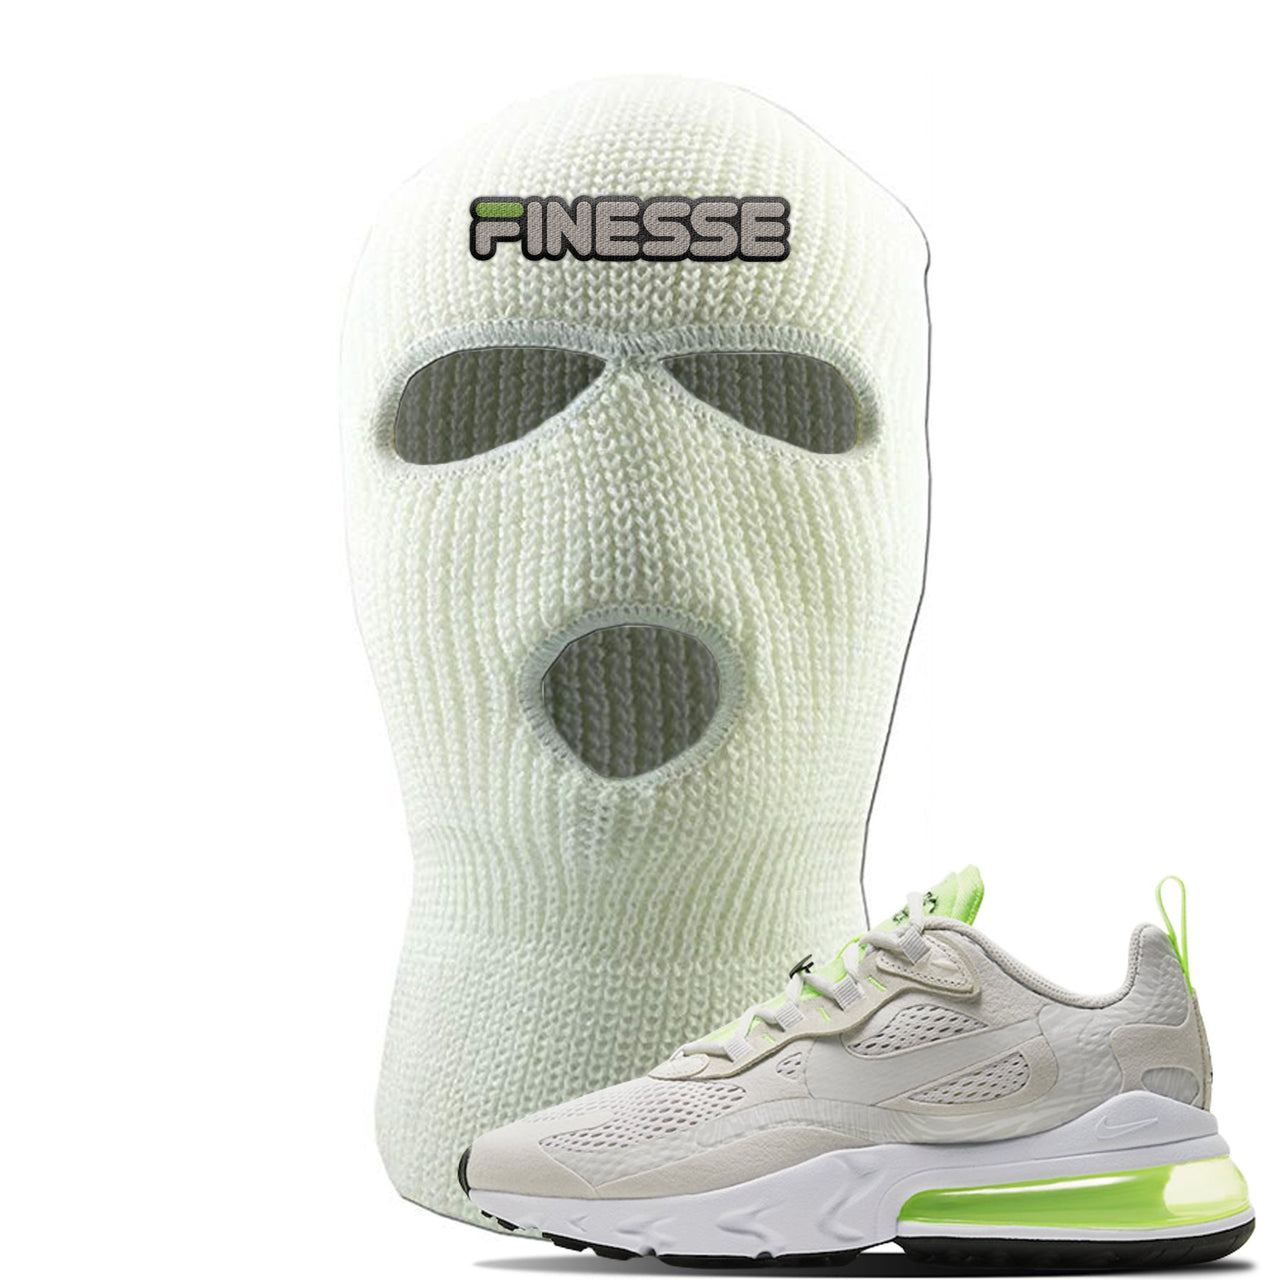 Ghost Green React 270s Ski Mask | Finesse, White